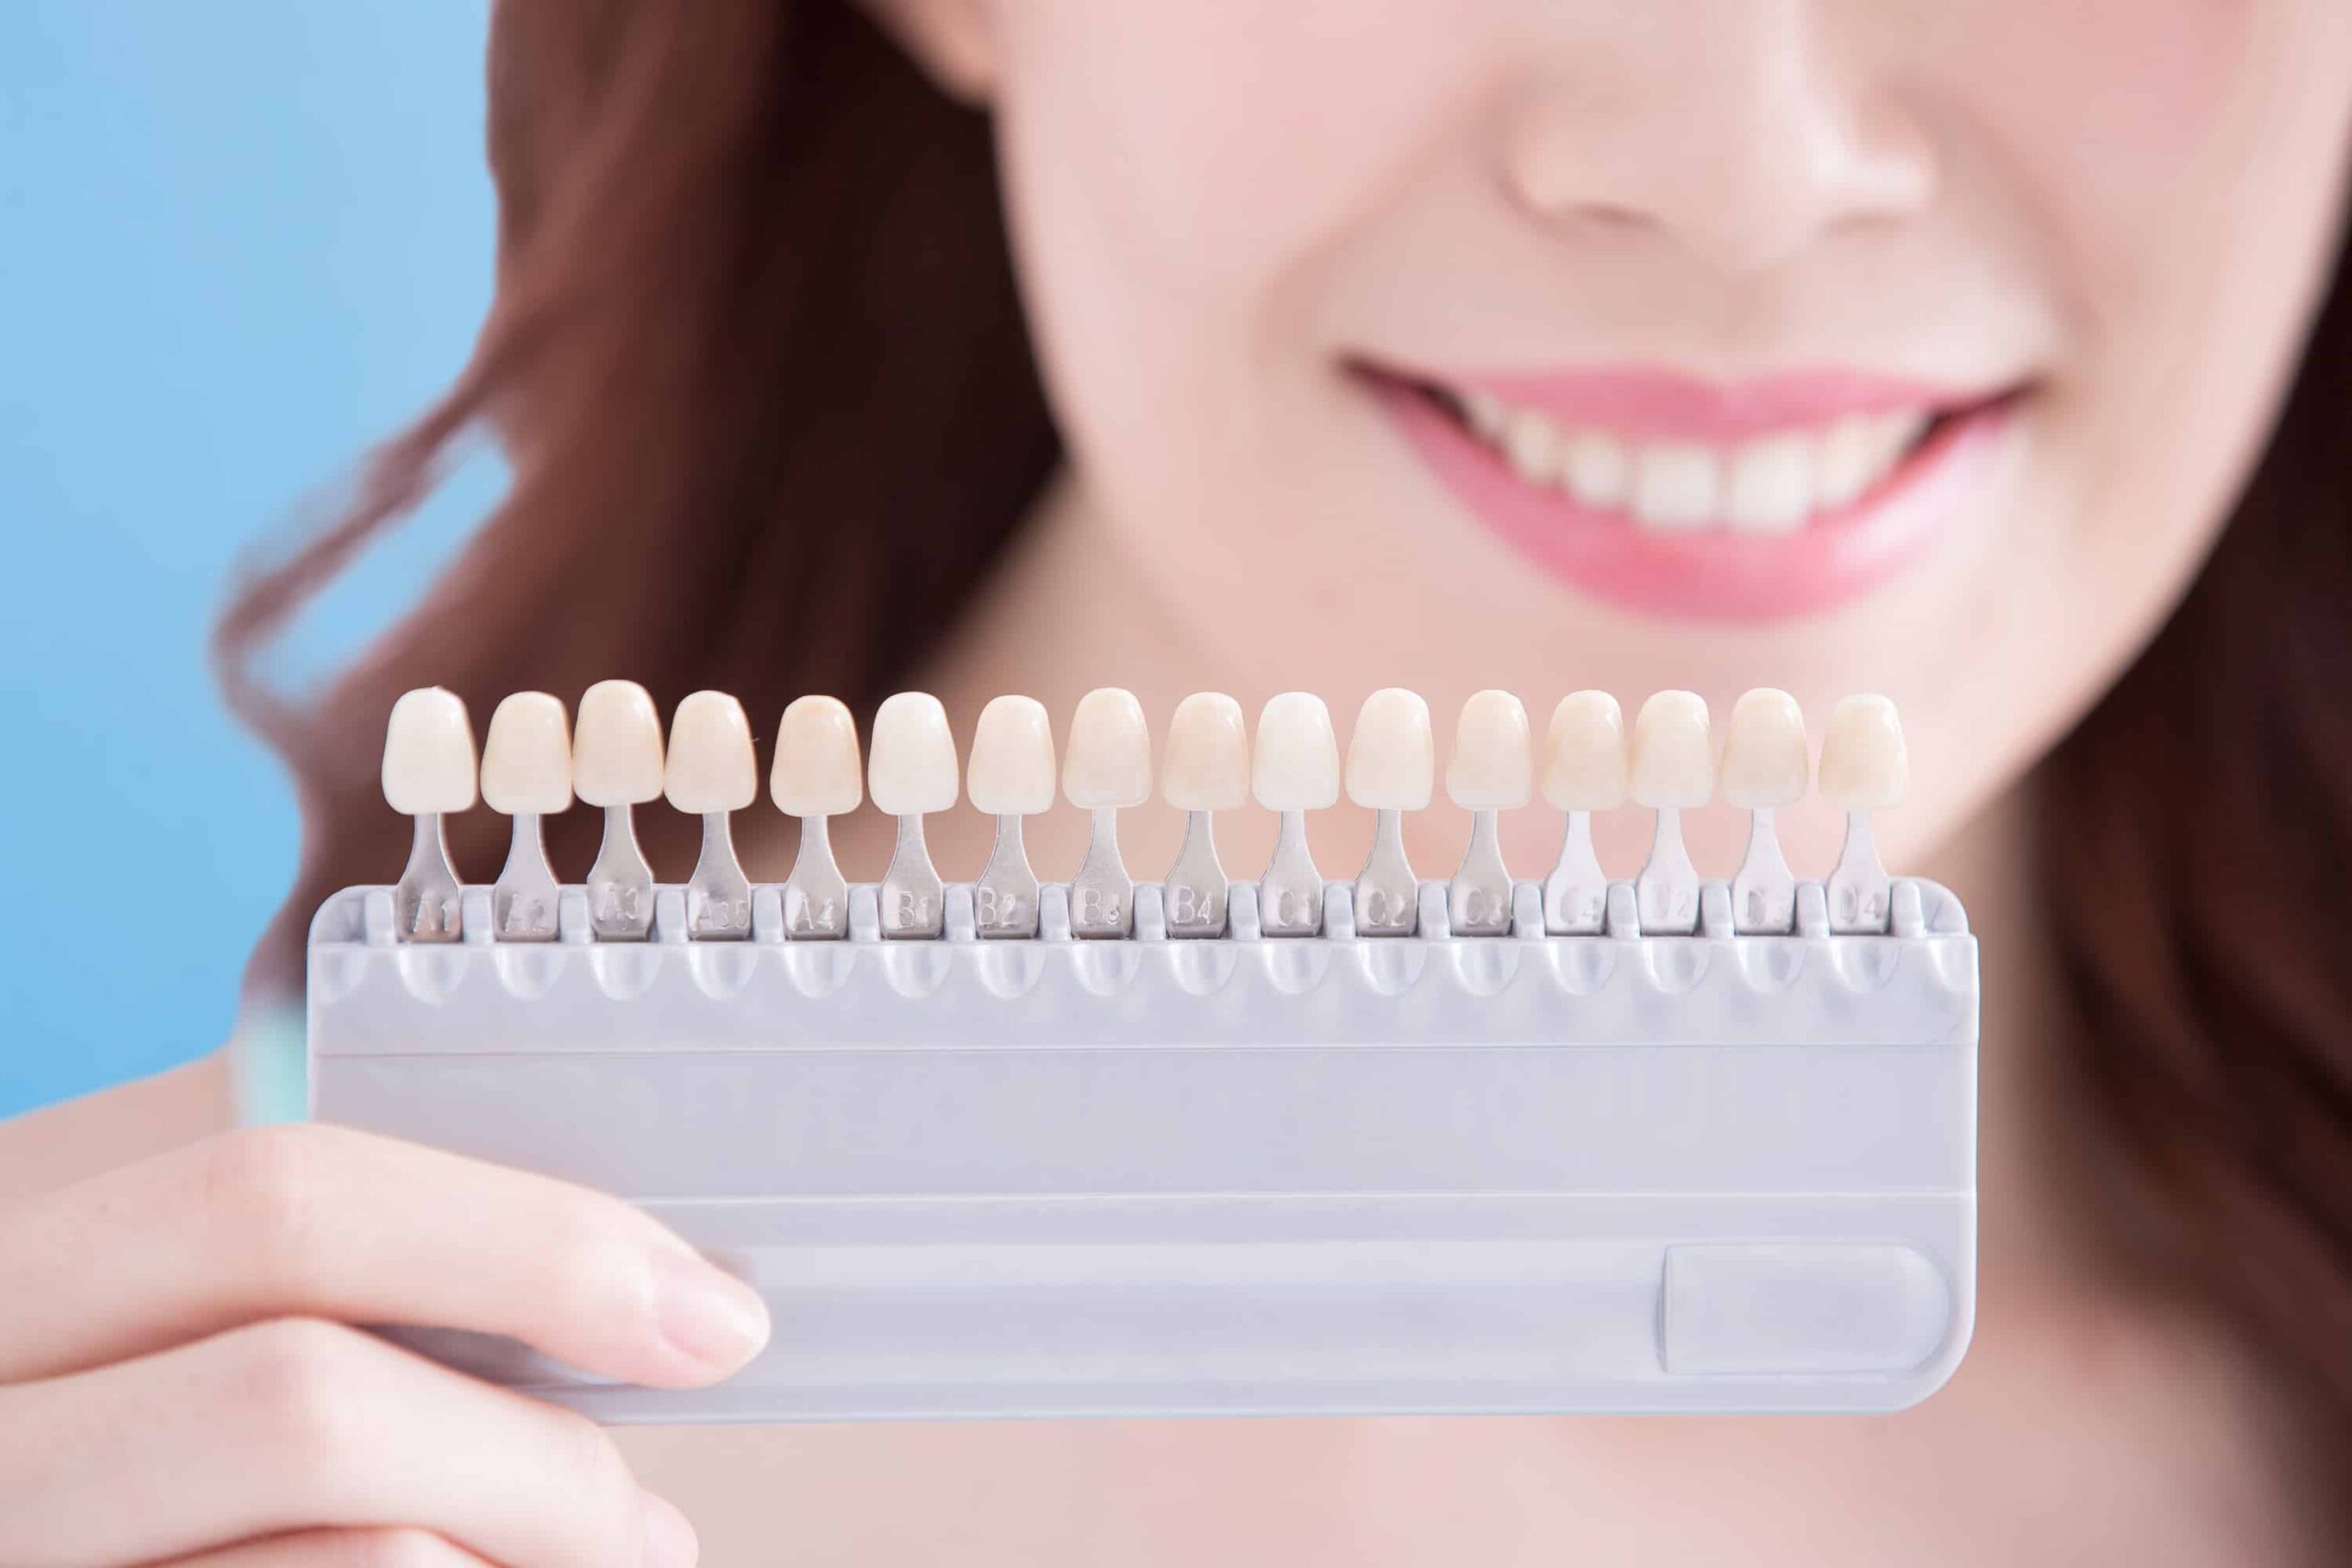 Does Whitening Your Teeth Damage Them